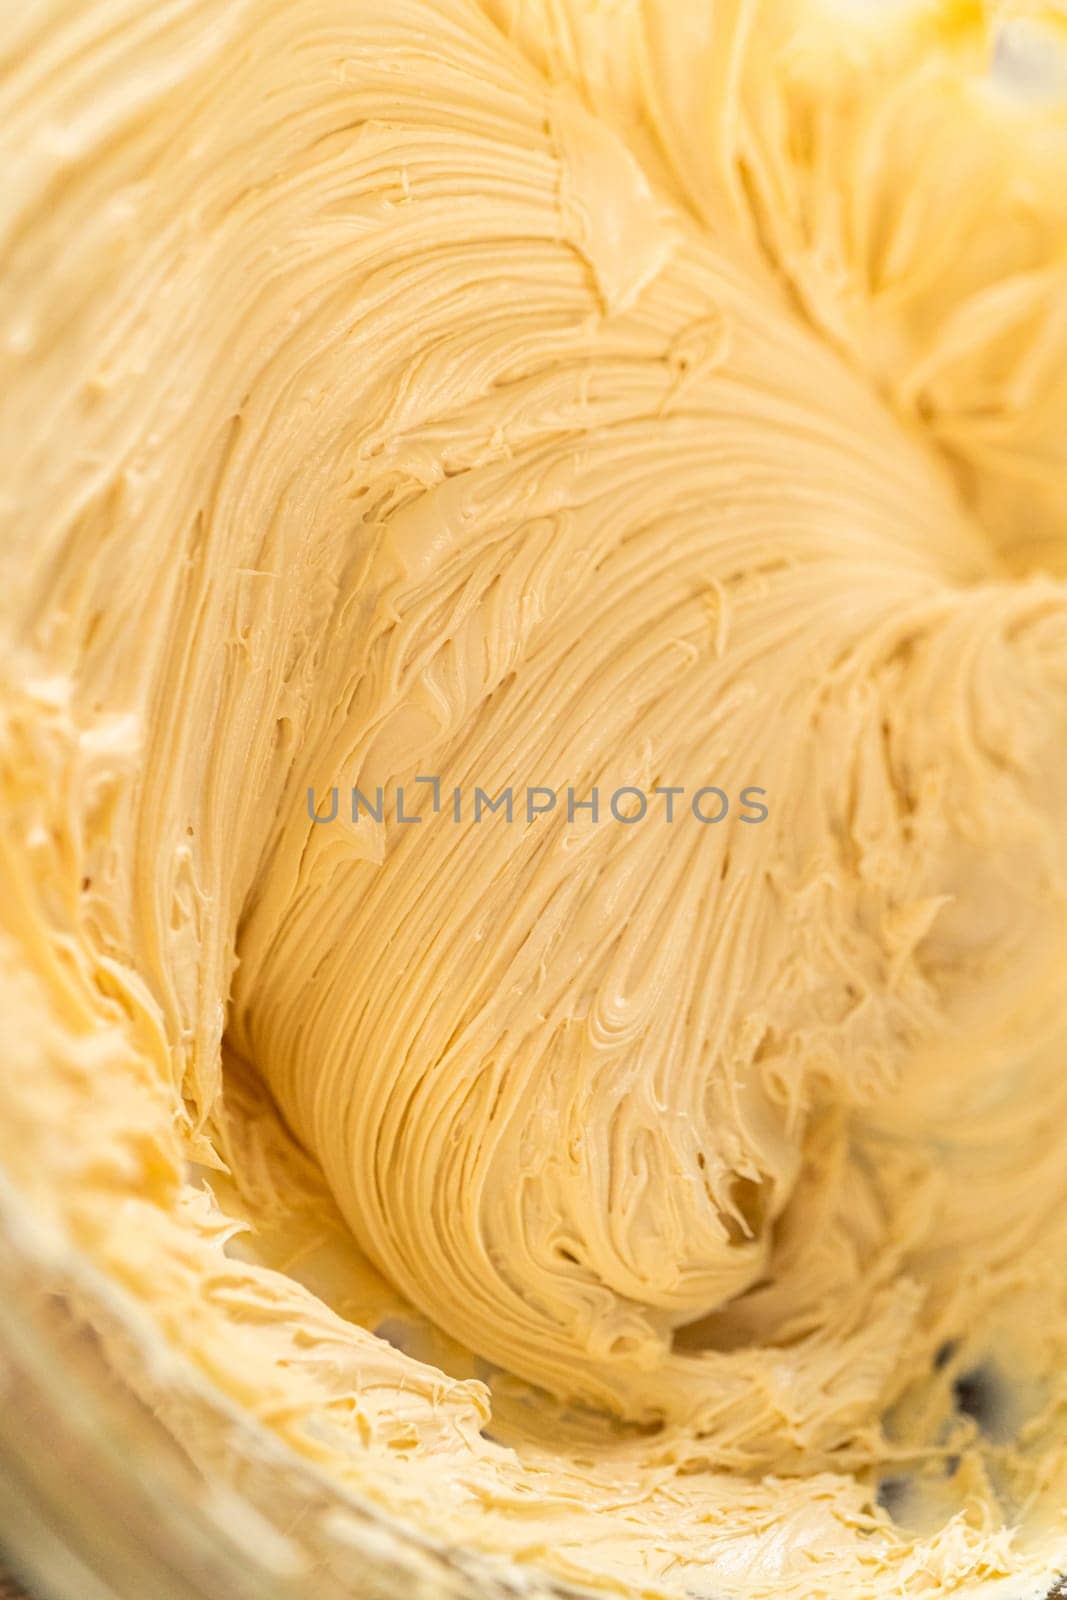 Whipping up salted caramel buttercream frosting for the gingerbread bundt cake.